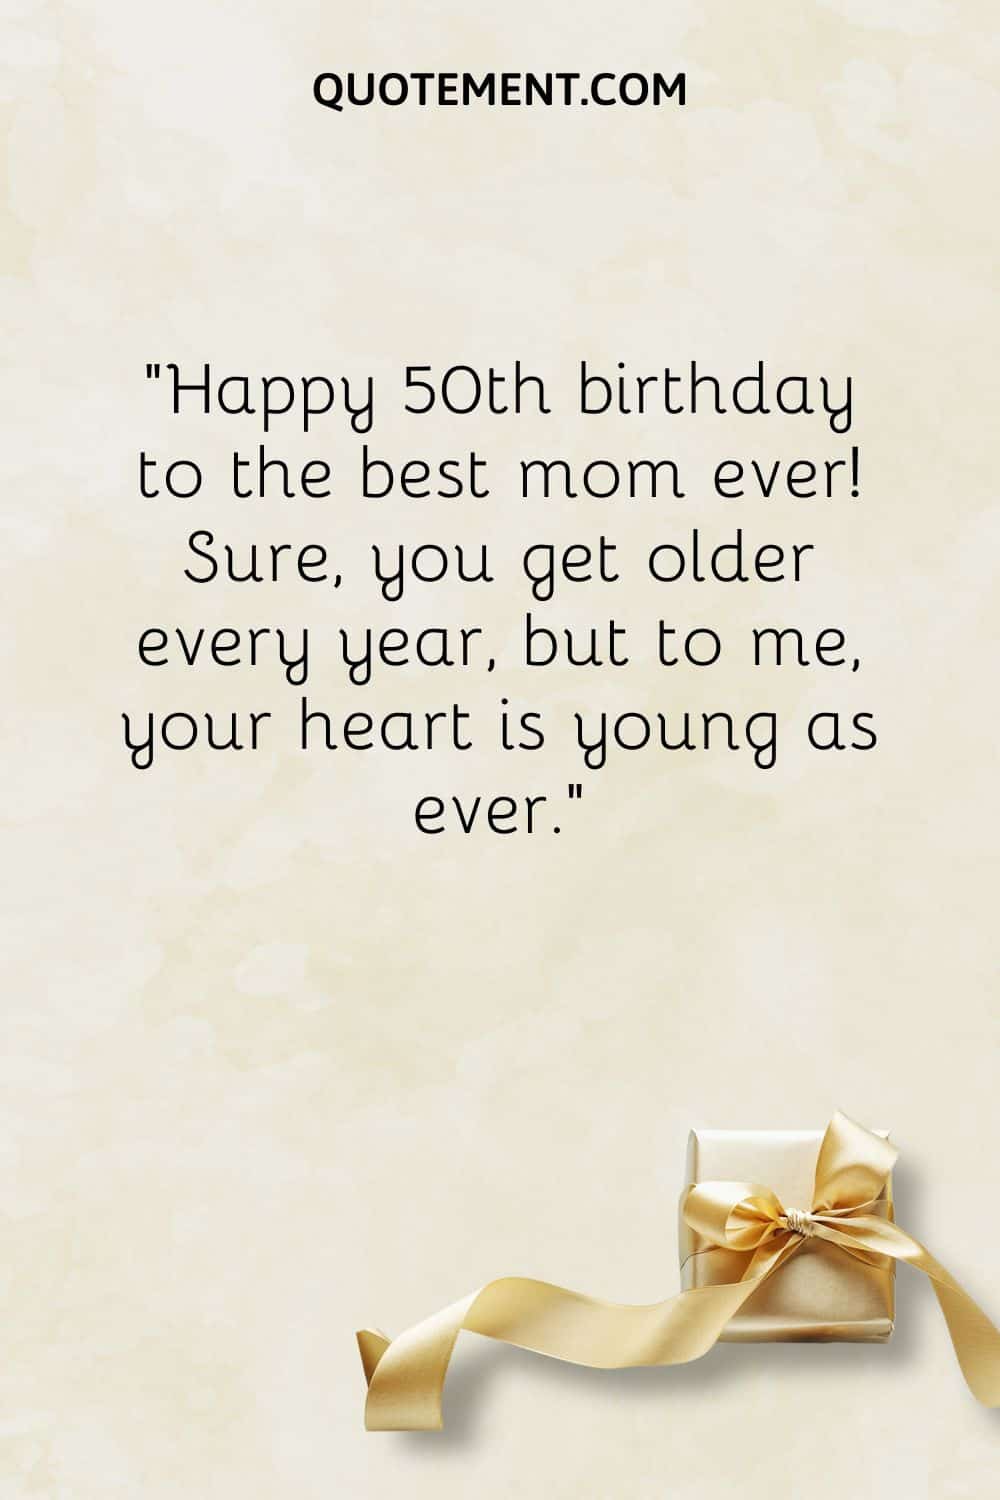 “Happy 50th birthday to the best mom ever! Sure, you get older every year, but to me, your heart is young as ever.”